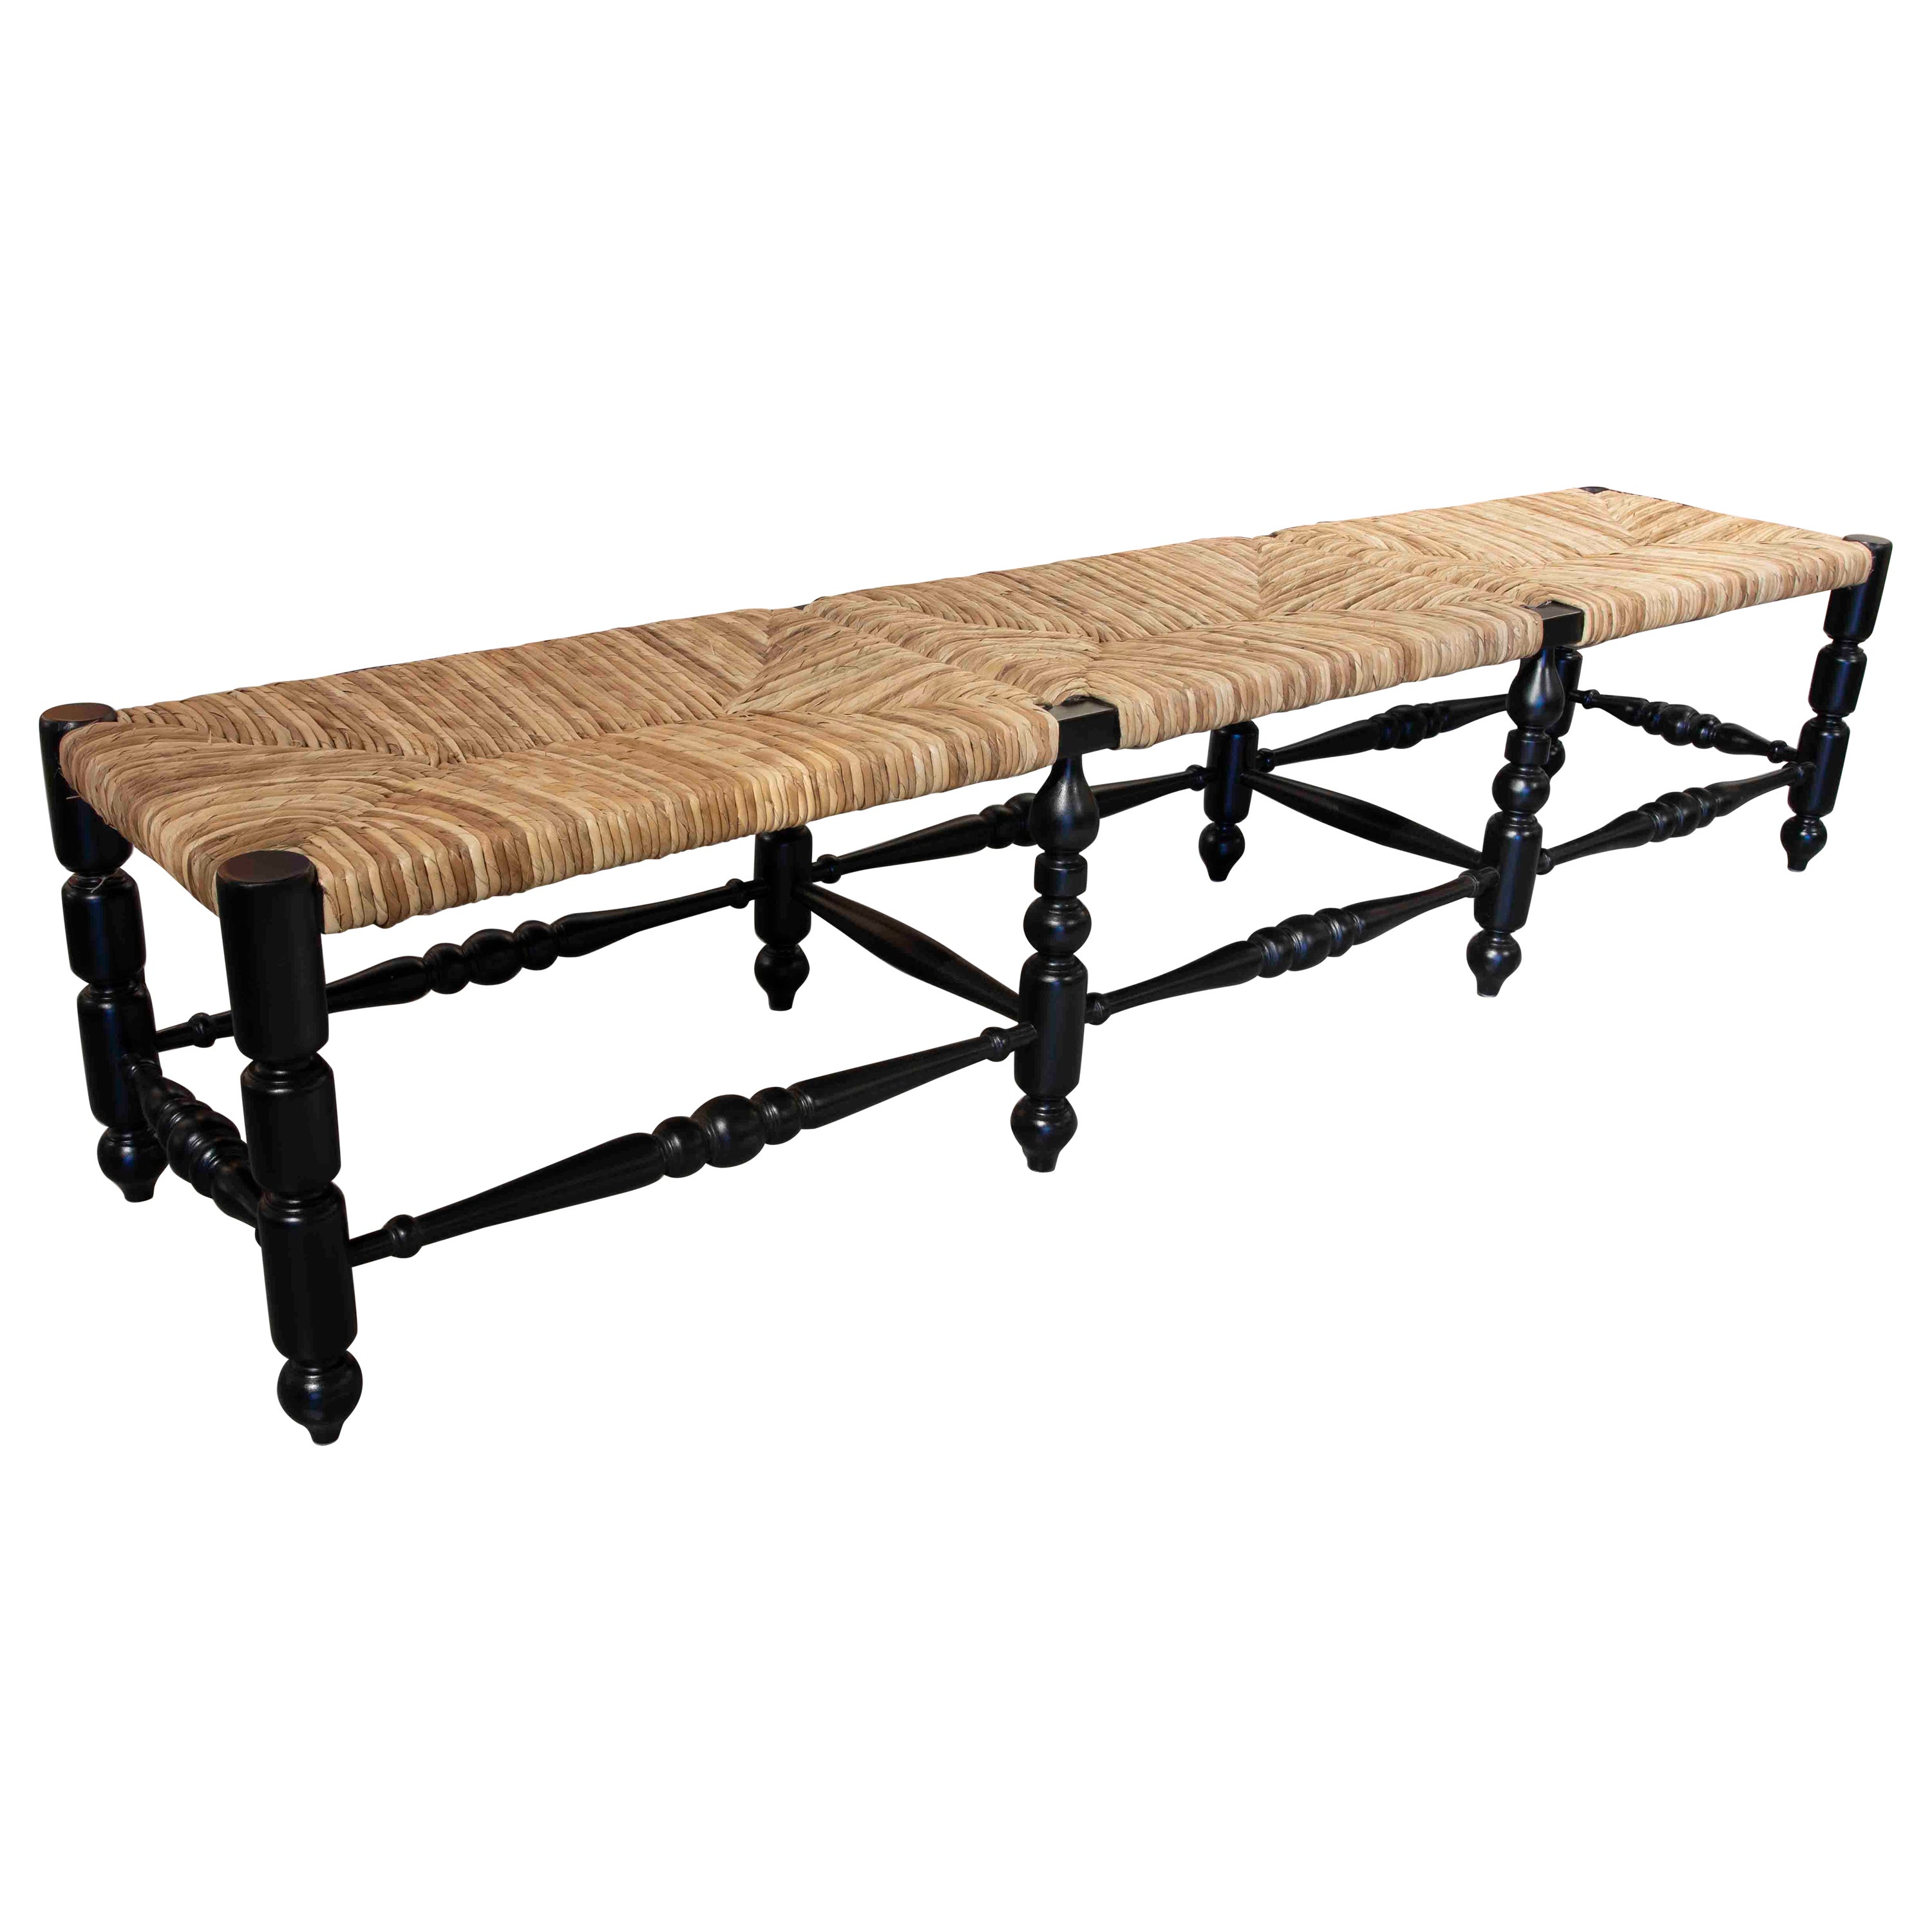 Wooden Bench Painted Black with Natural Rope Stitched Top For Sale